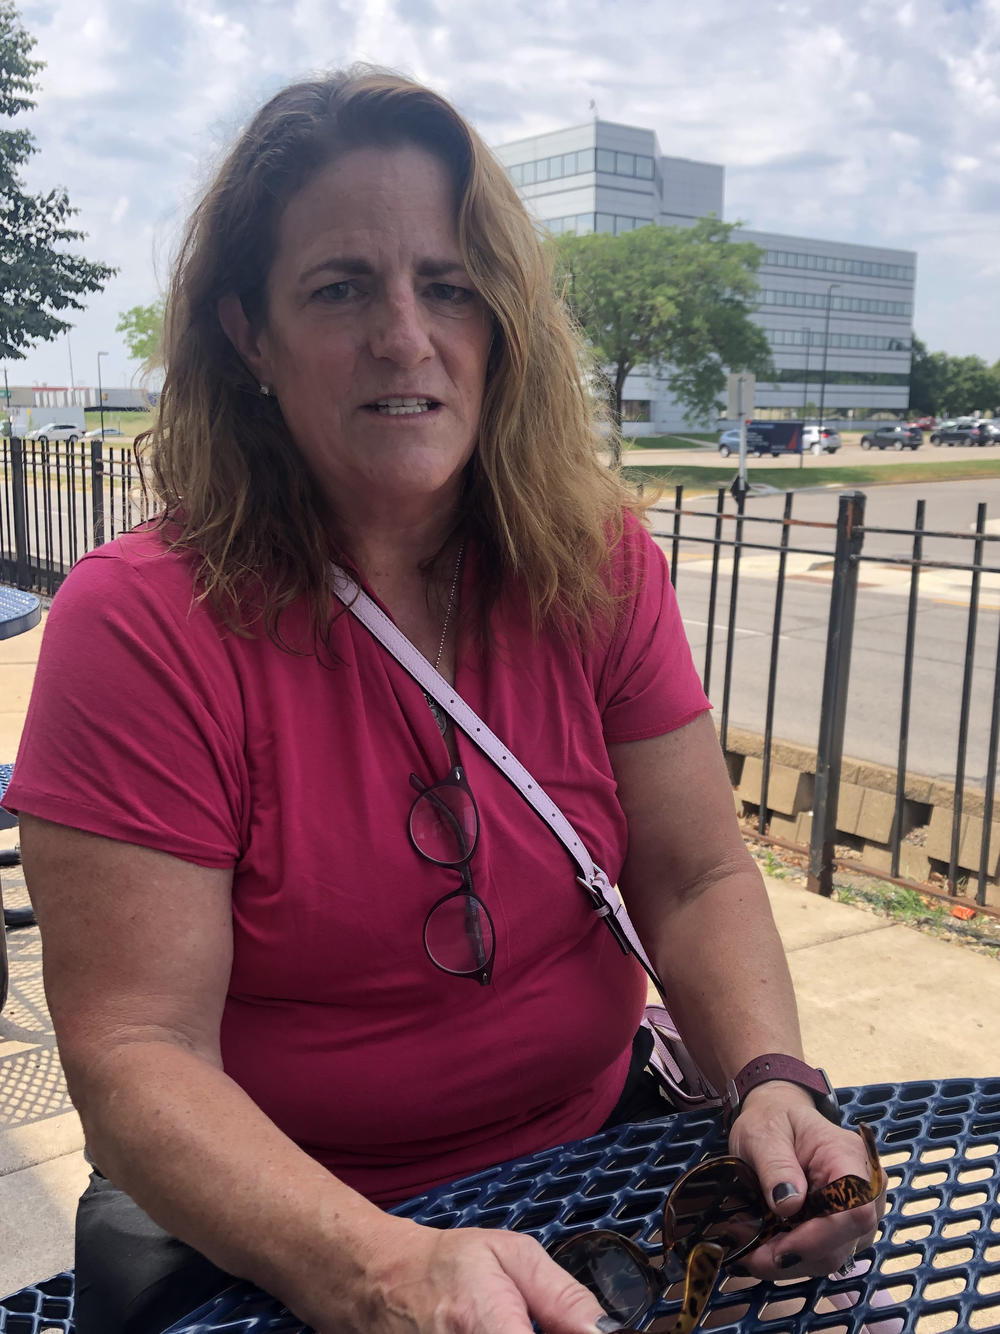 Kim Lund Voss retired from the Minneapolis Police Department in January 2021 — earlier than she'd planned. Part of a wave of departing officers, she says cops right now don't feel supported.